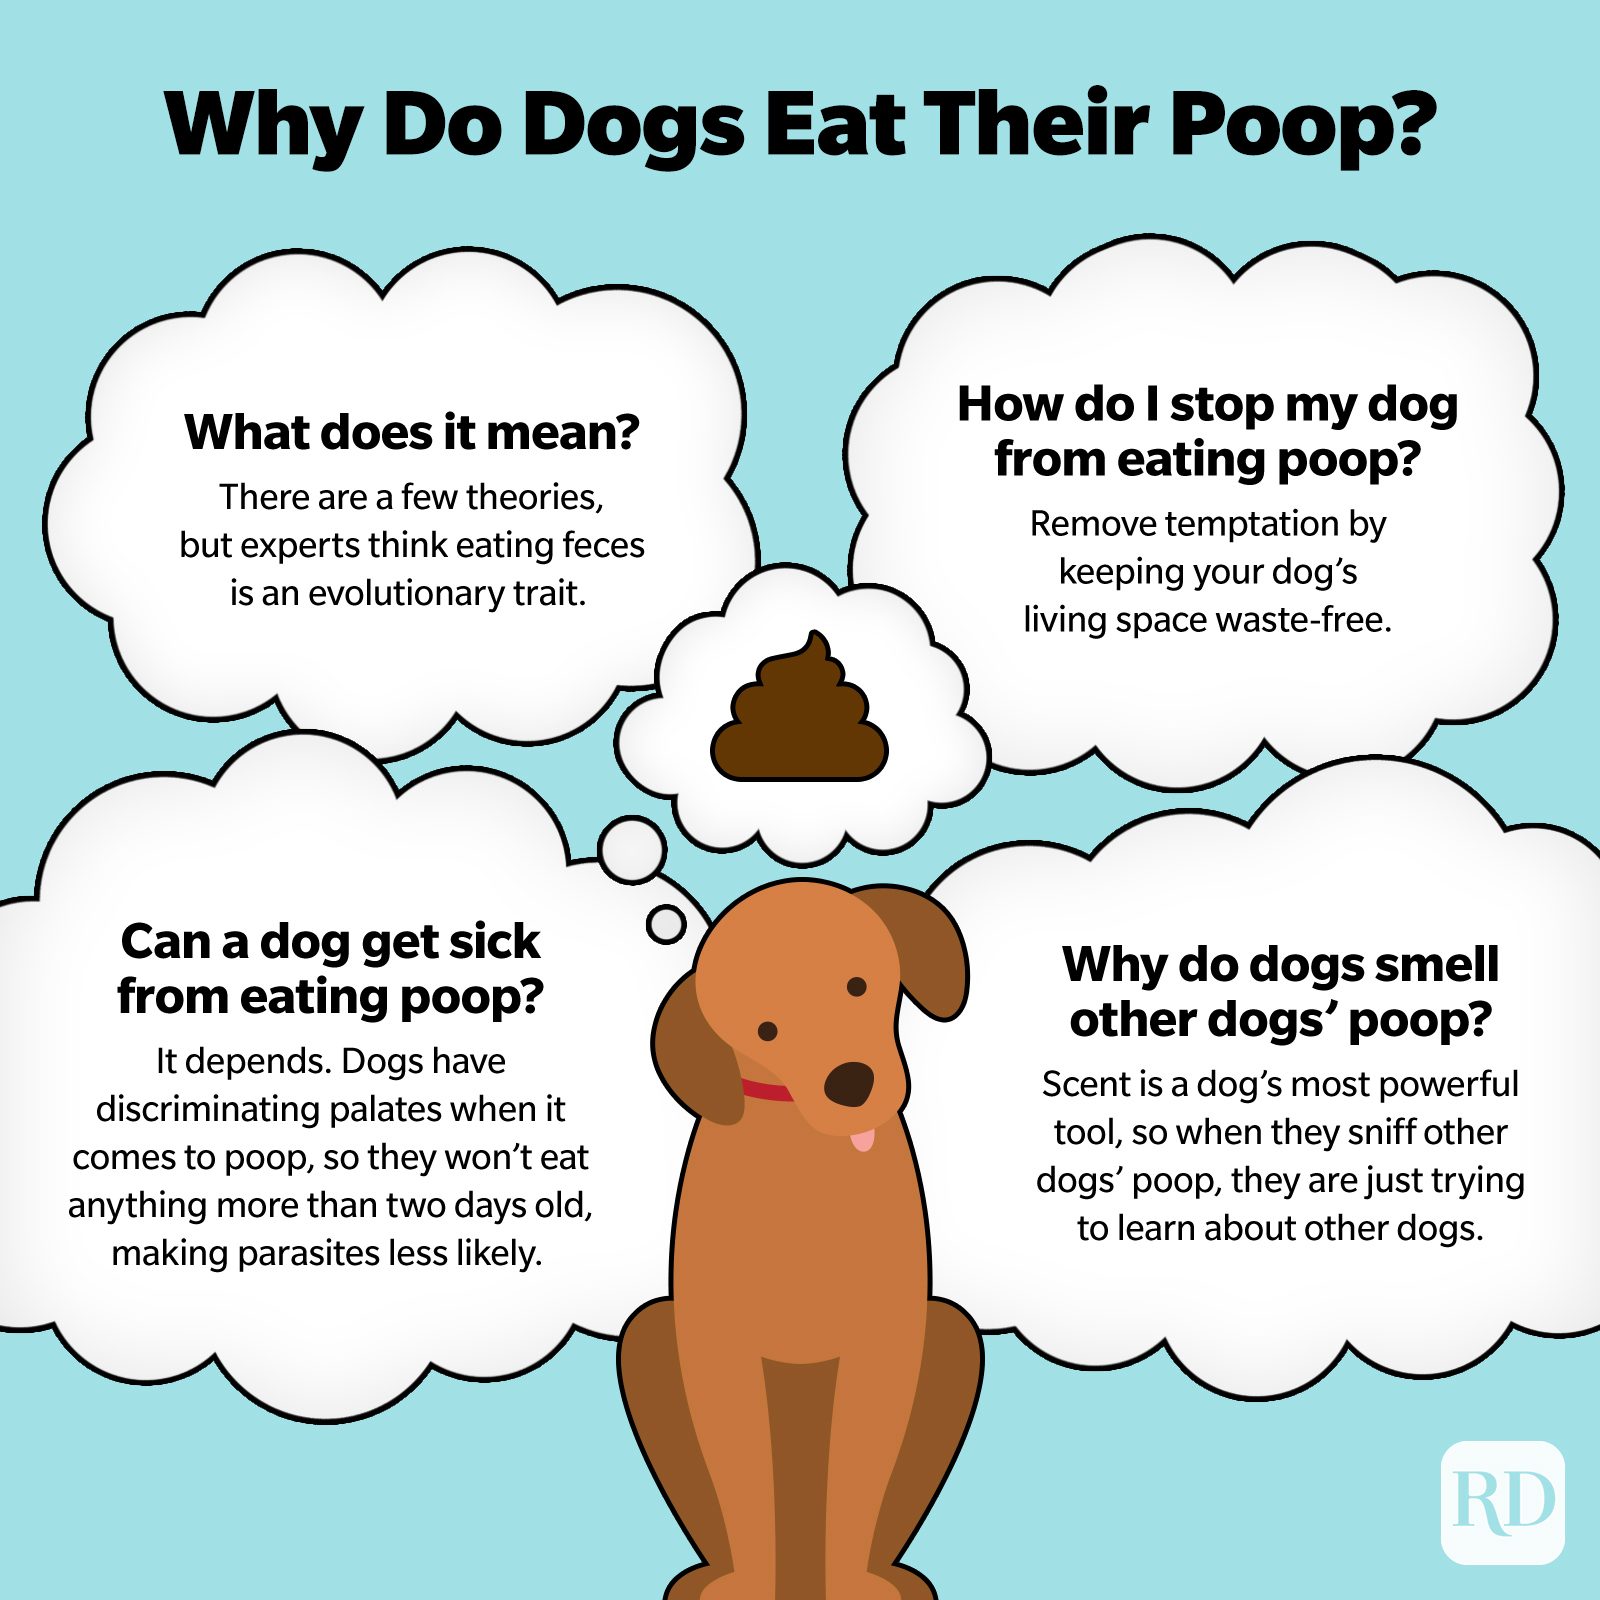 RD Why Do Dogs Eat Their Poop Infographic V2 ?fit=680